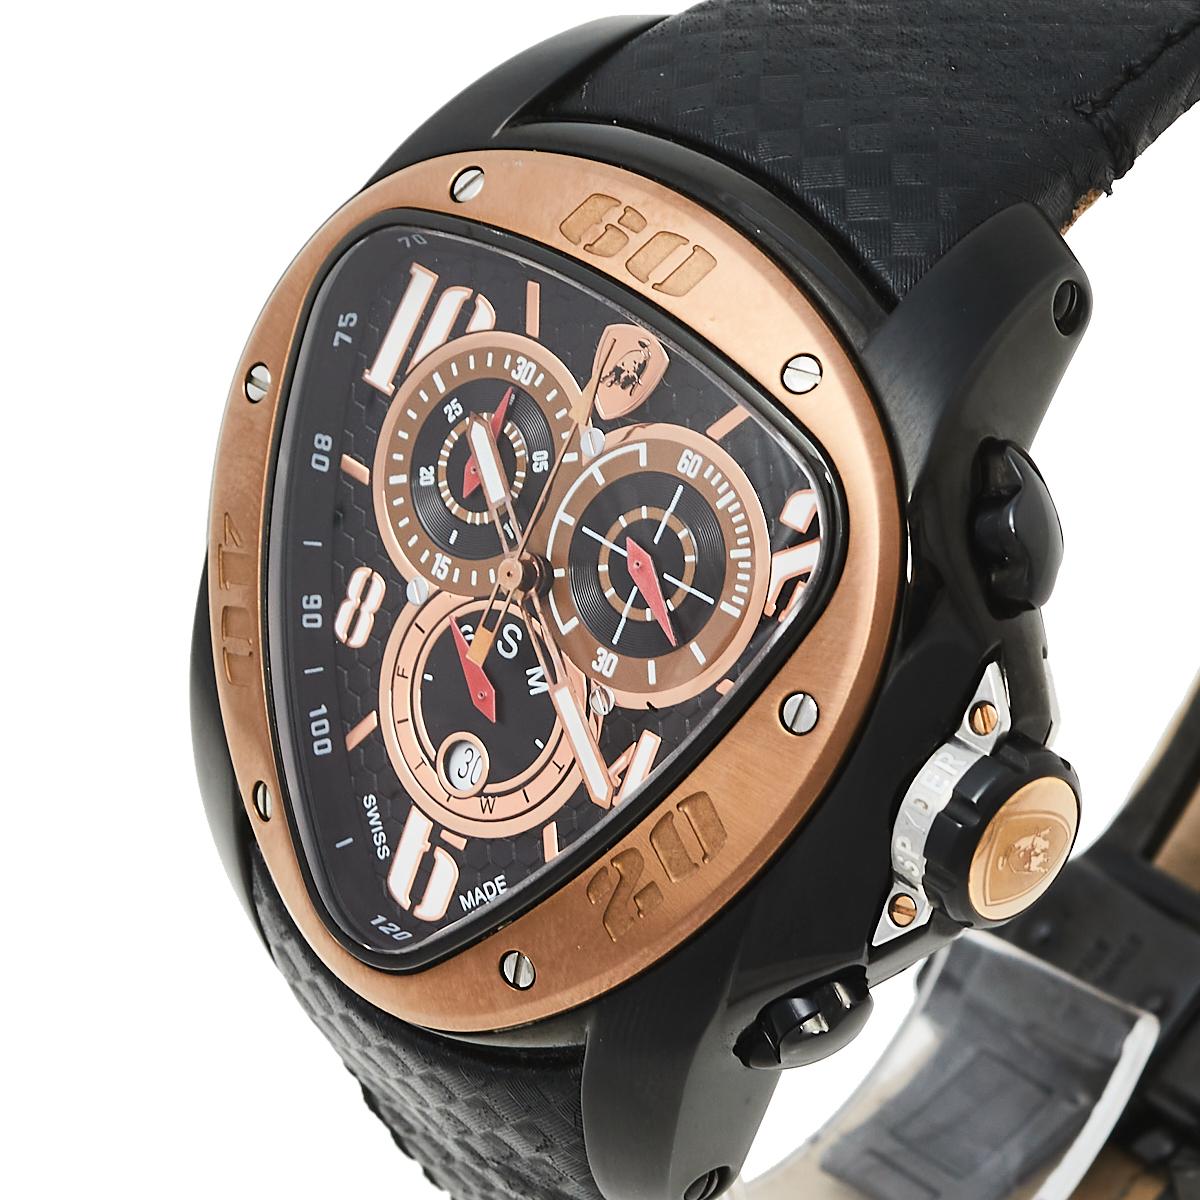 Tonino Lamborghini brings you this smart timepiece that is made from stainless steel. It has a triangle case with a dial housing Arabic numeral hour markers, sub-dials, and a date window. Swiss-made, the chronograph watch also flaunts a sapphire